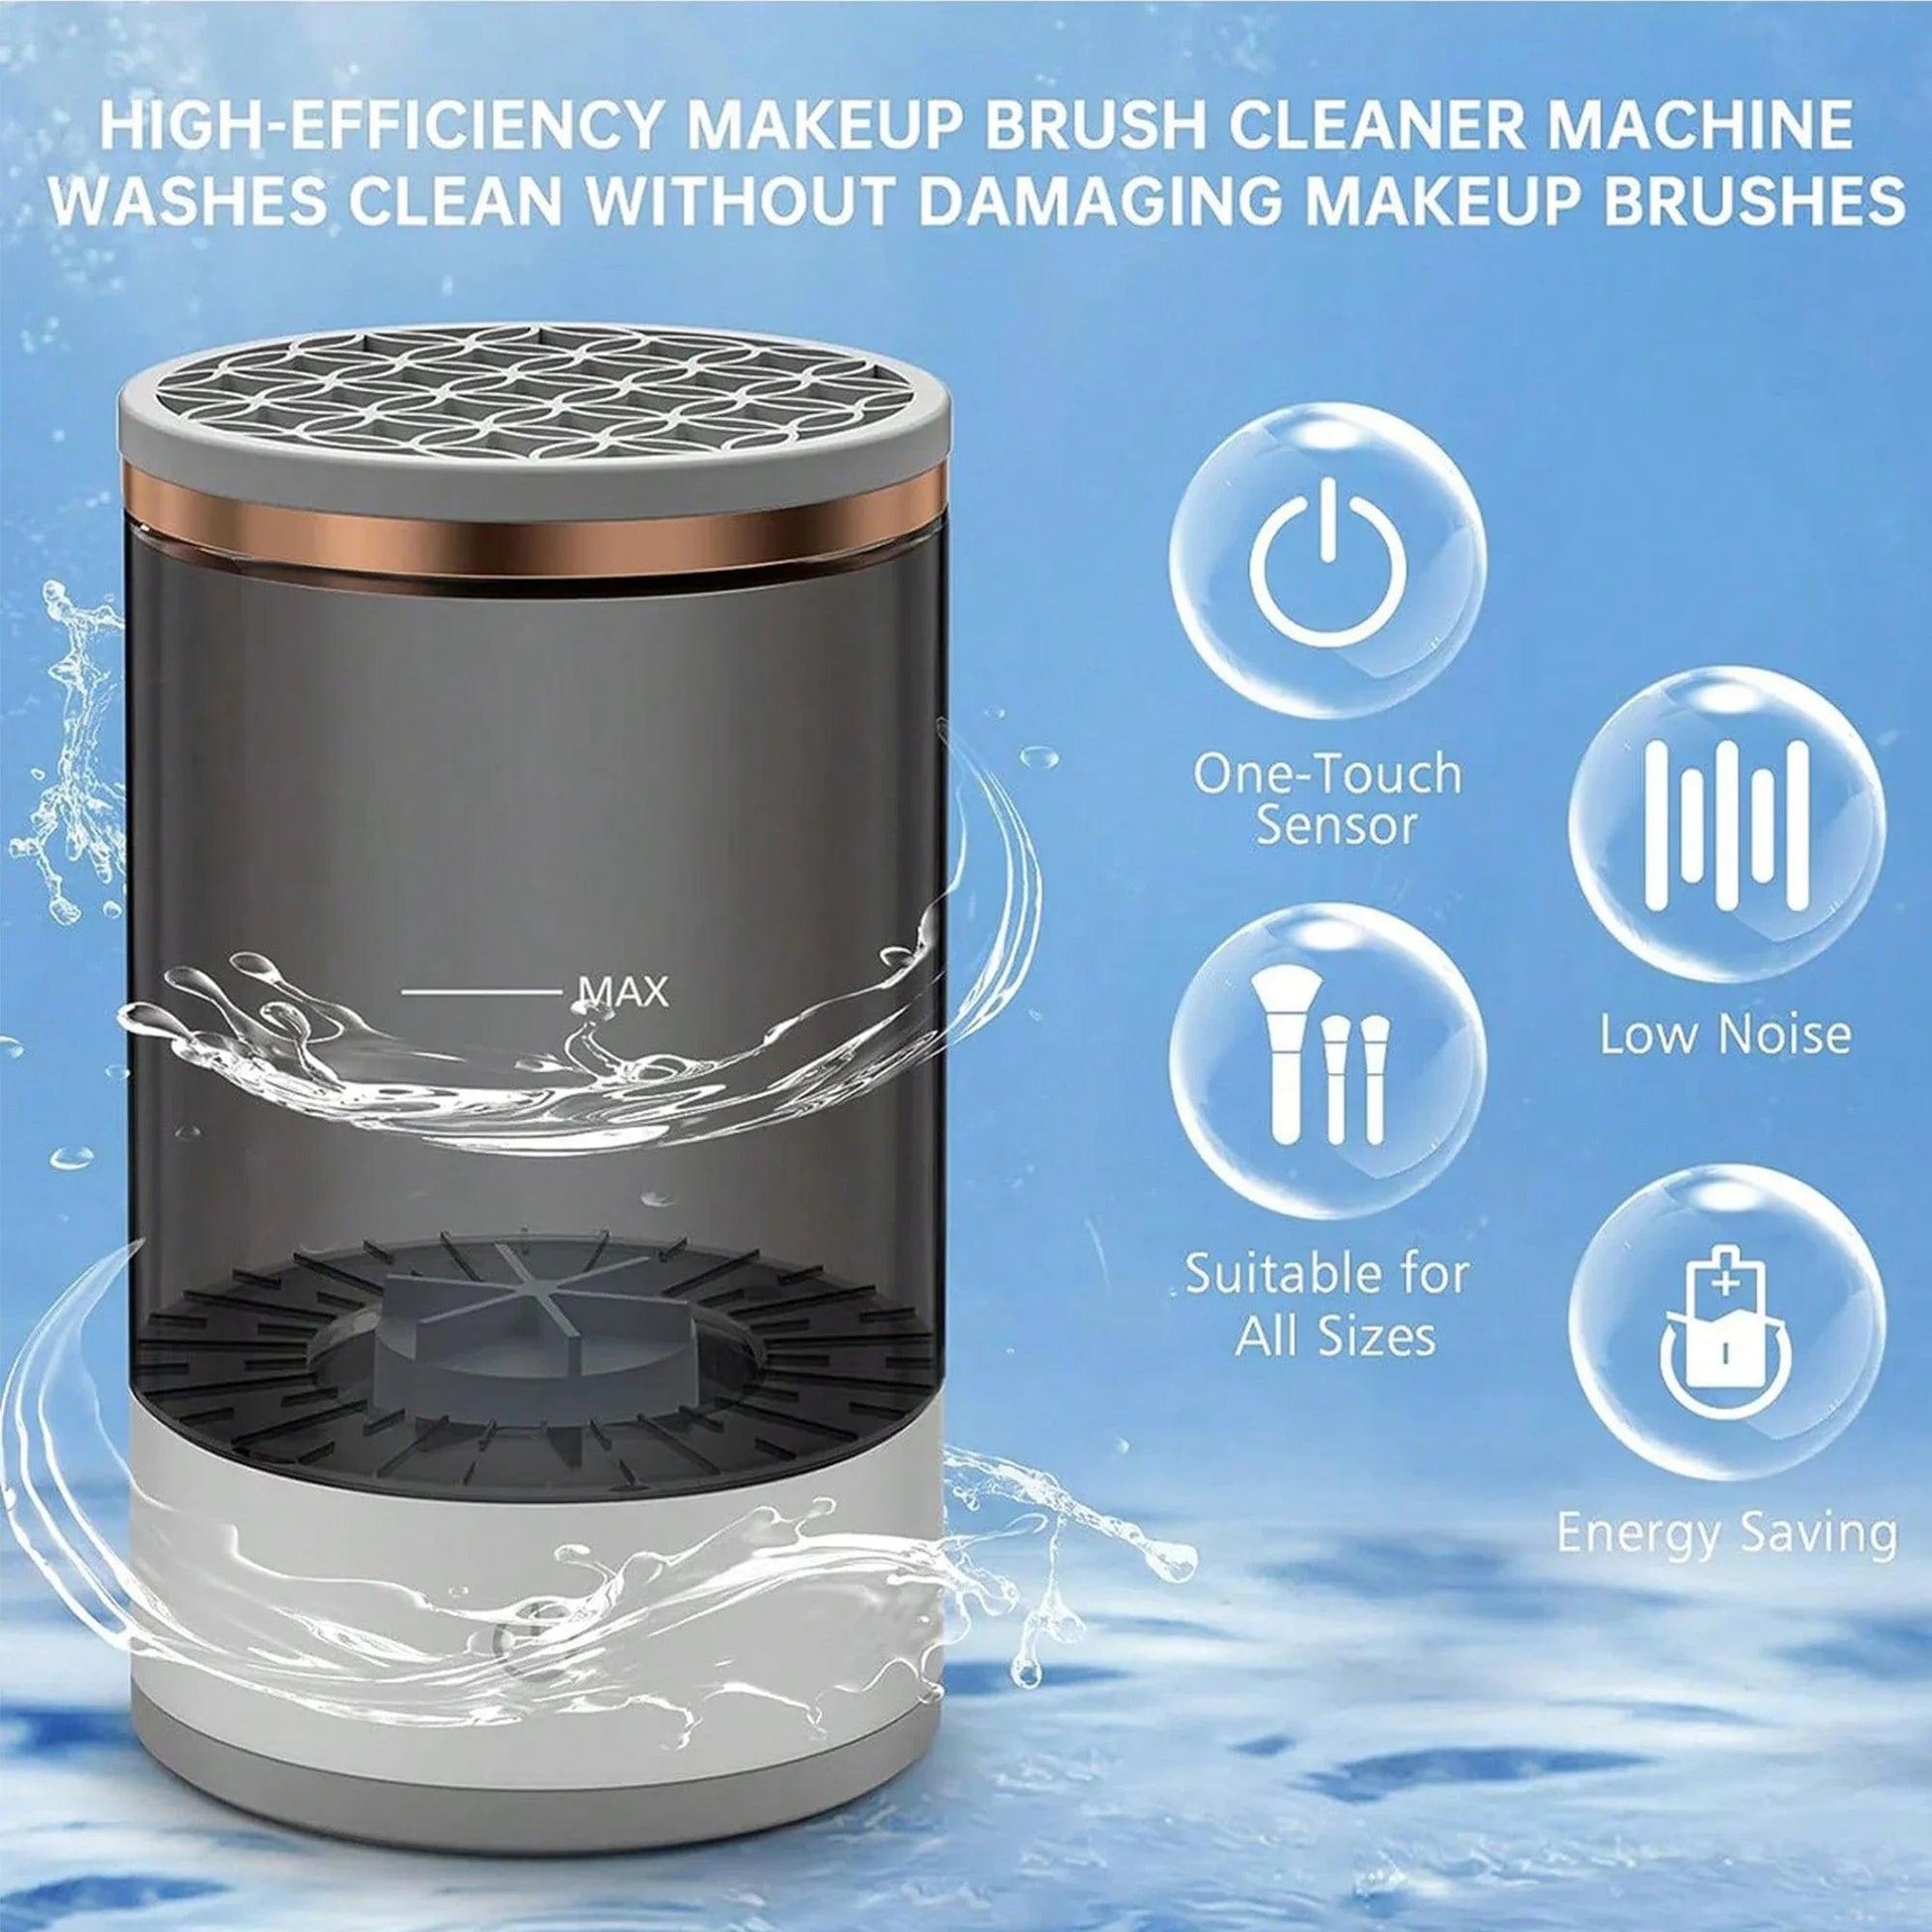 Automatic Makeup Brush Cleaning and Drying Stand - Advanced Modern